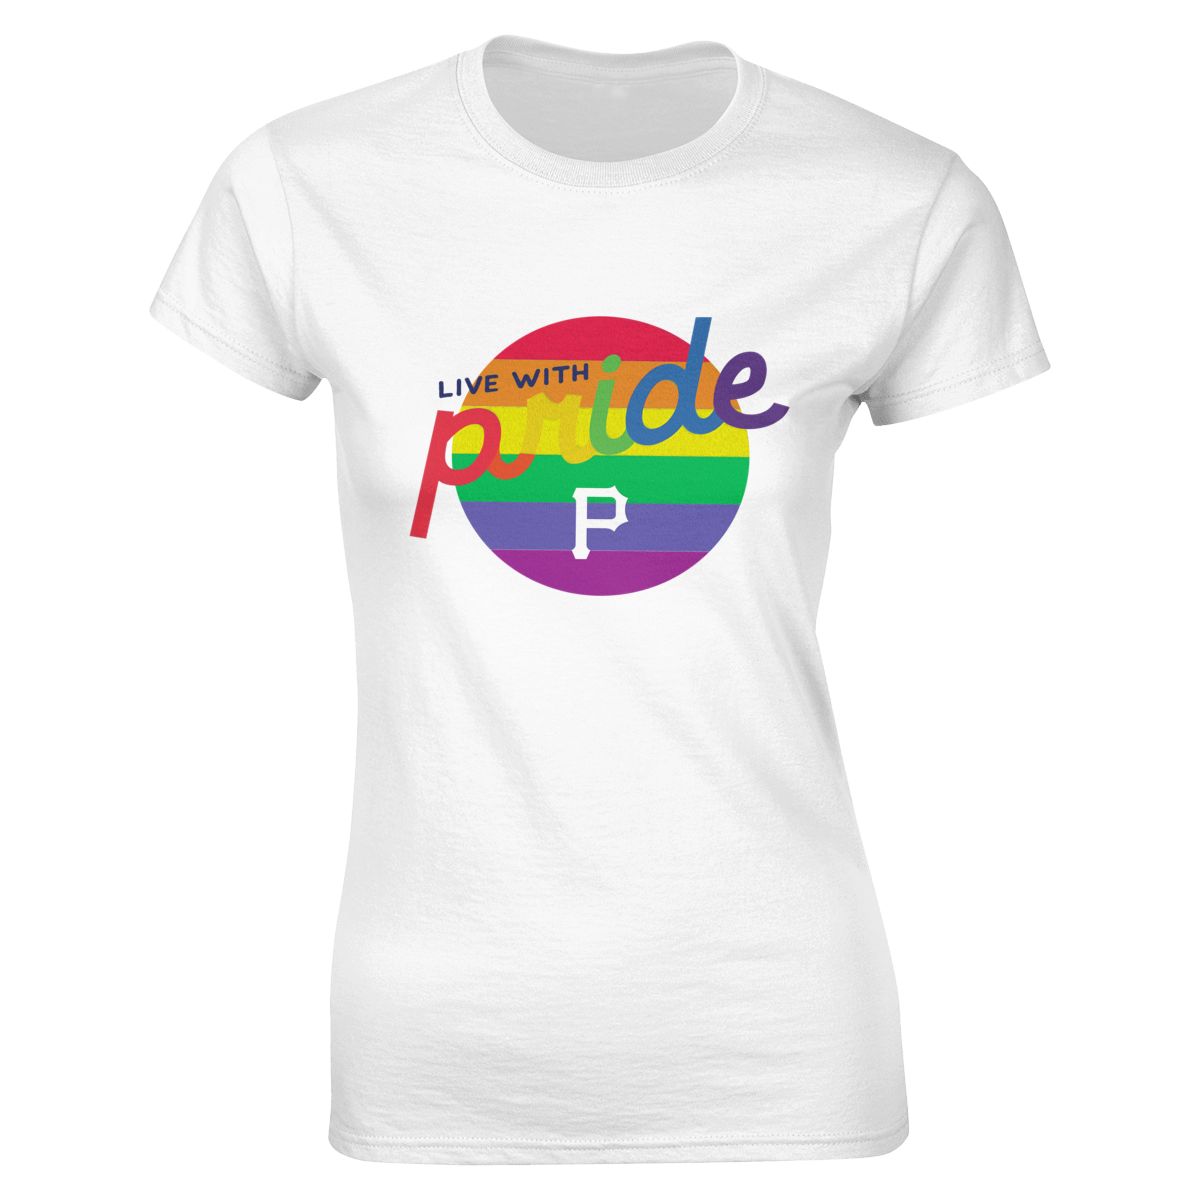 Pittsburgh Pirates Round LGBT Lettering Women's Soft Cotton T-Shirt